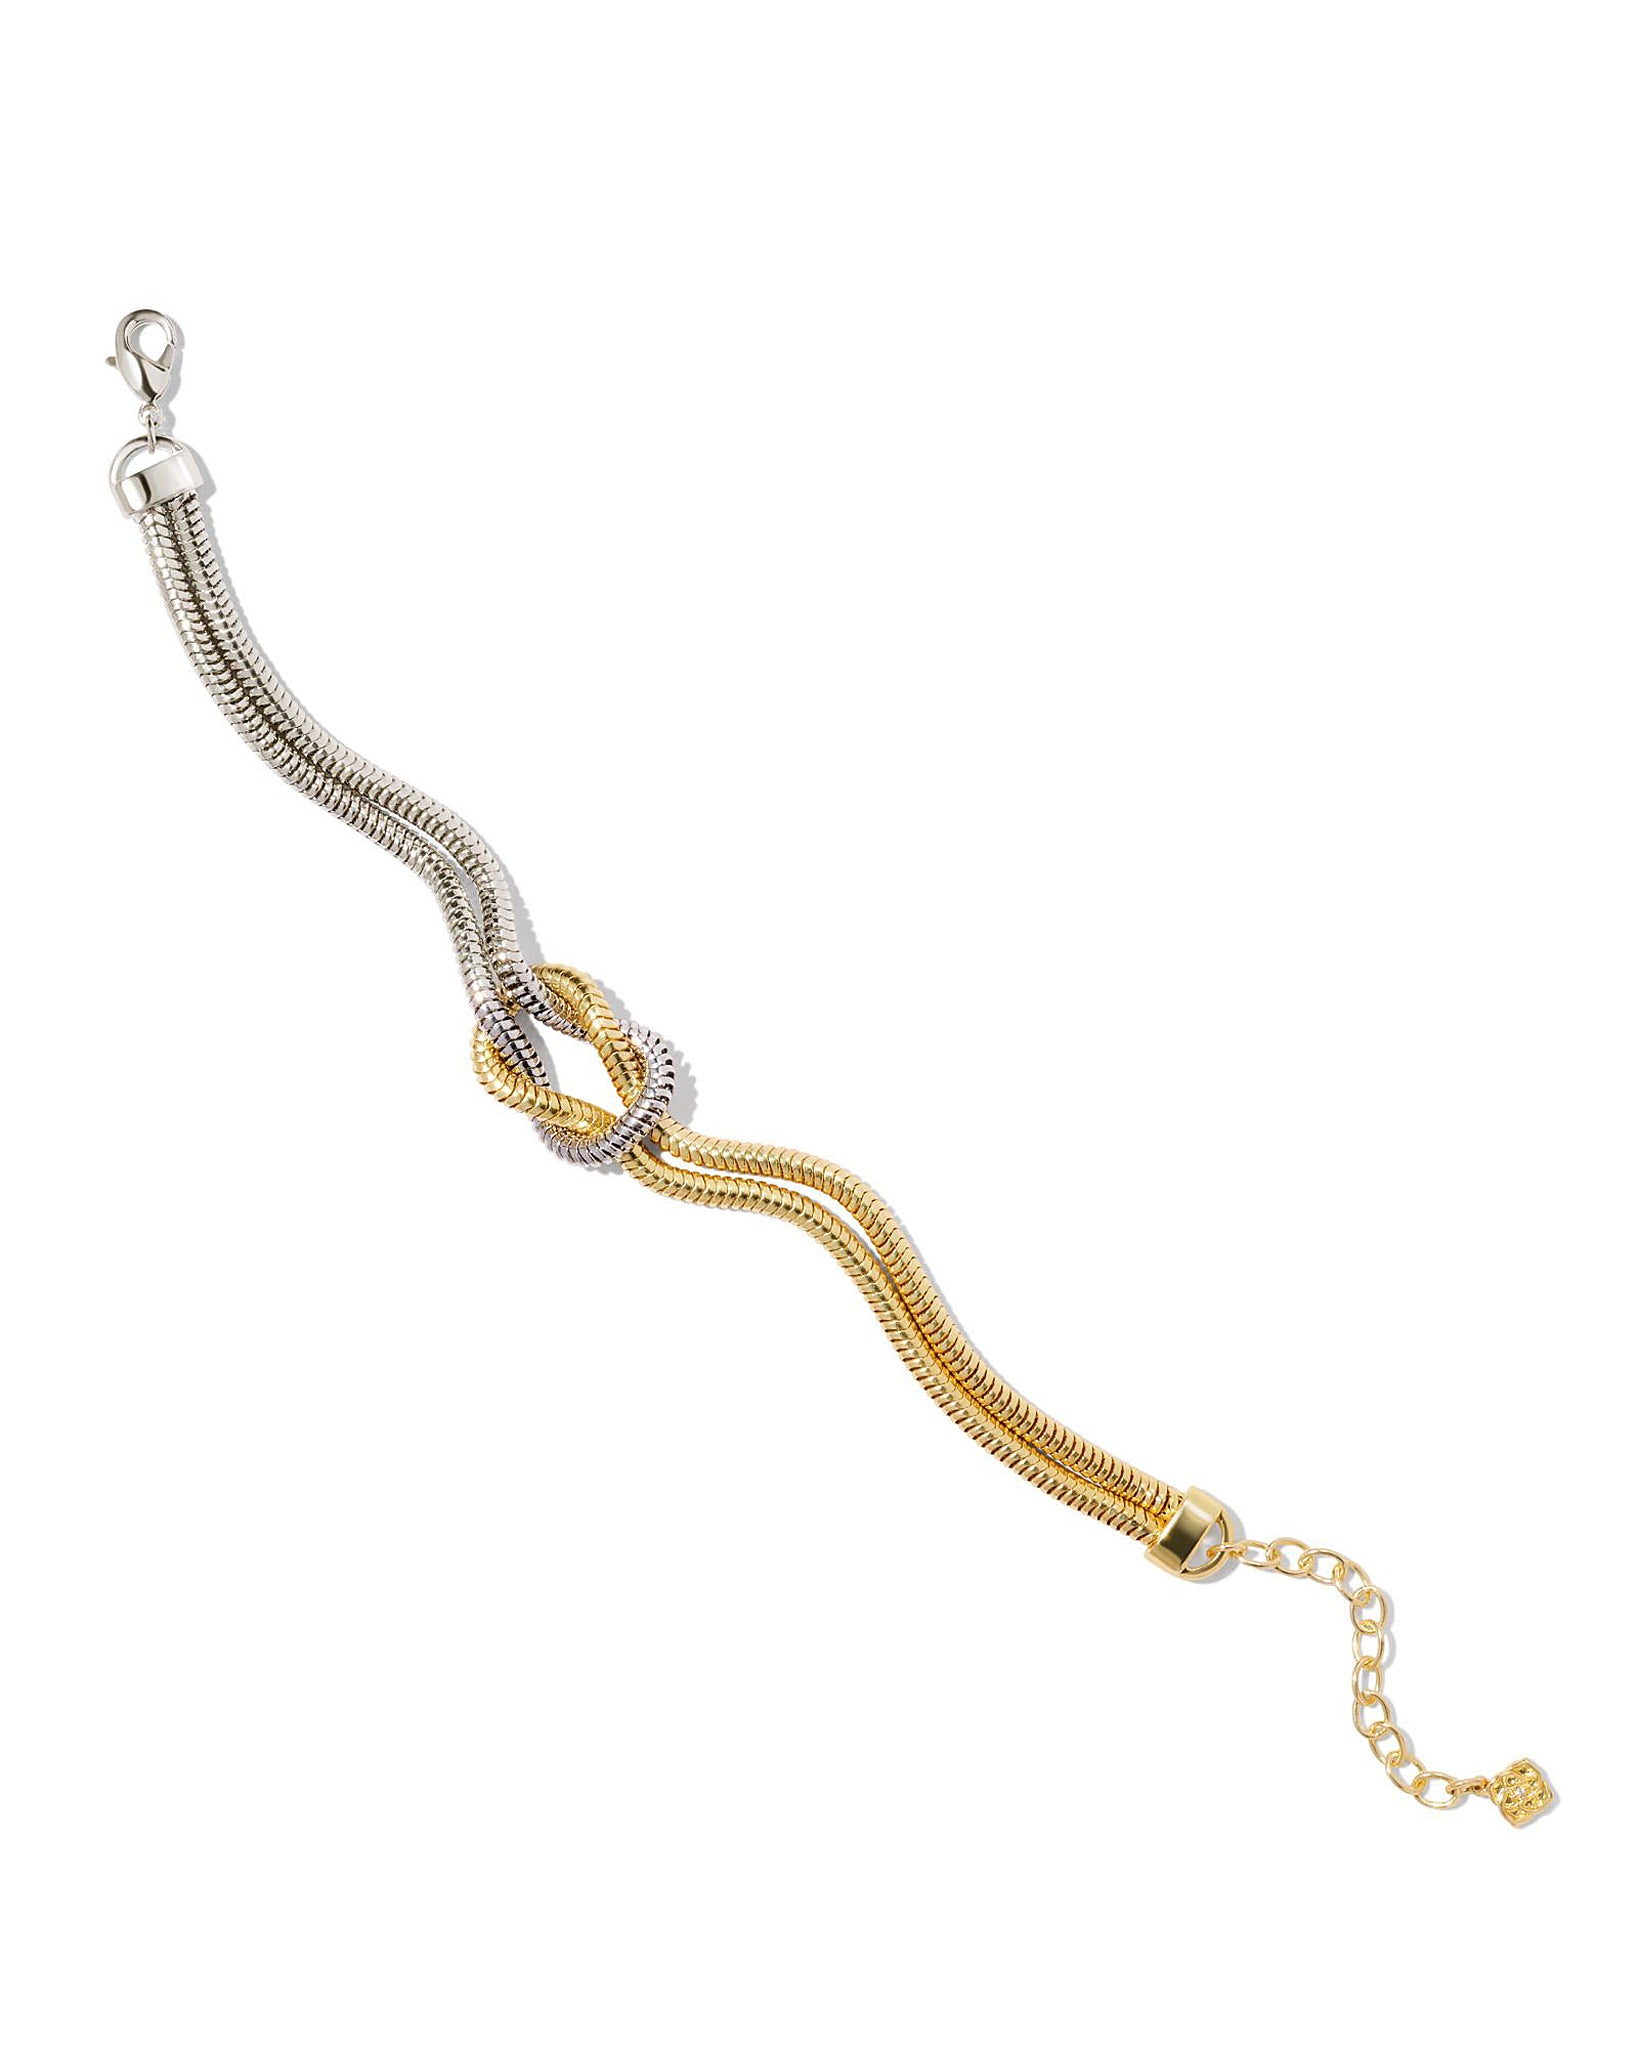 Kendra Scott Annie Chain Knot Bracelet in Gold and Rhodium Mixed Metal Plated